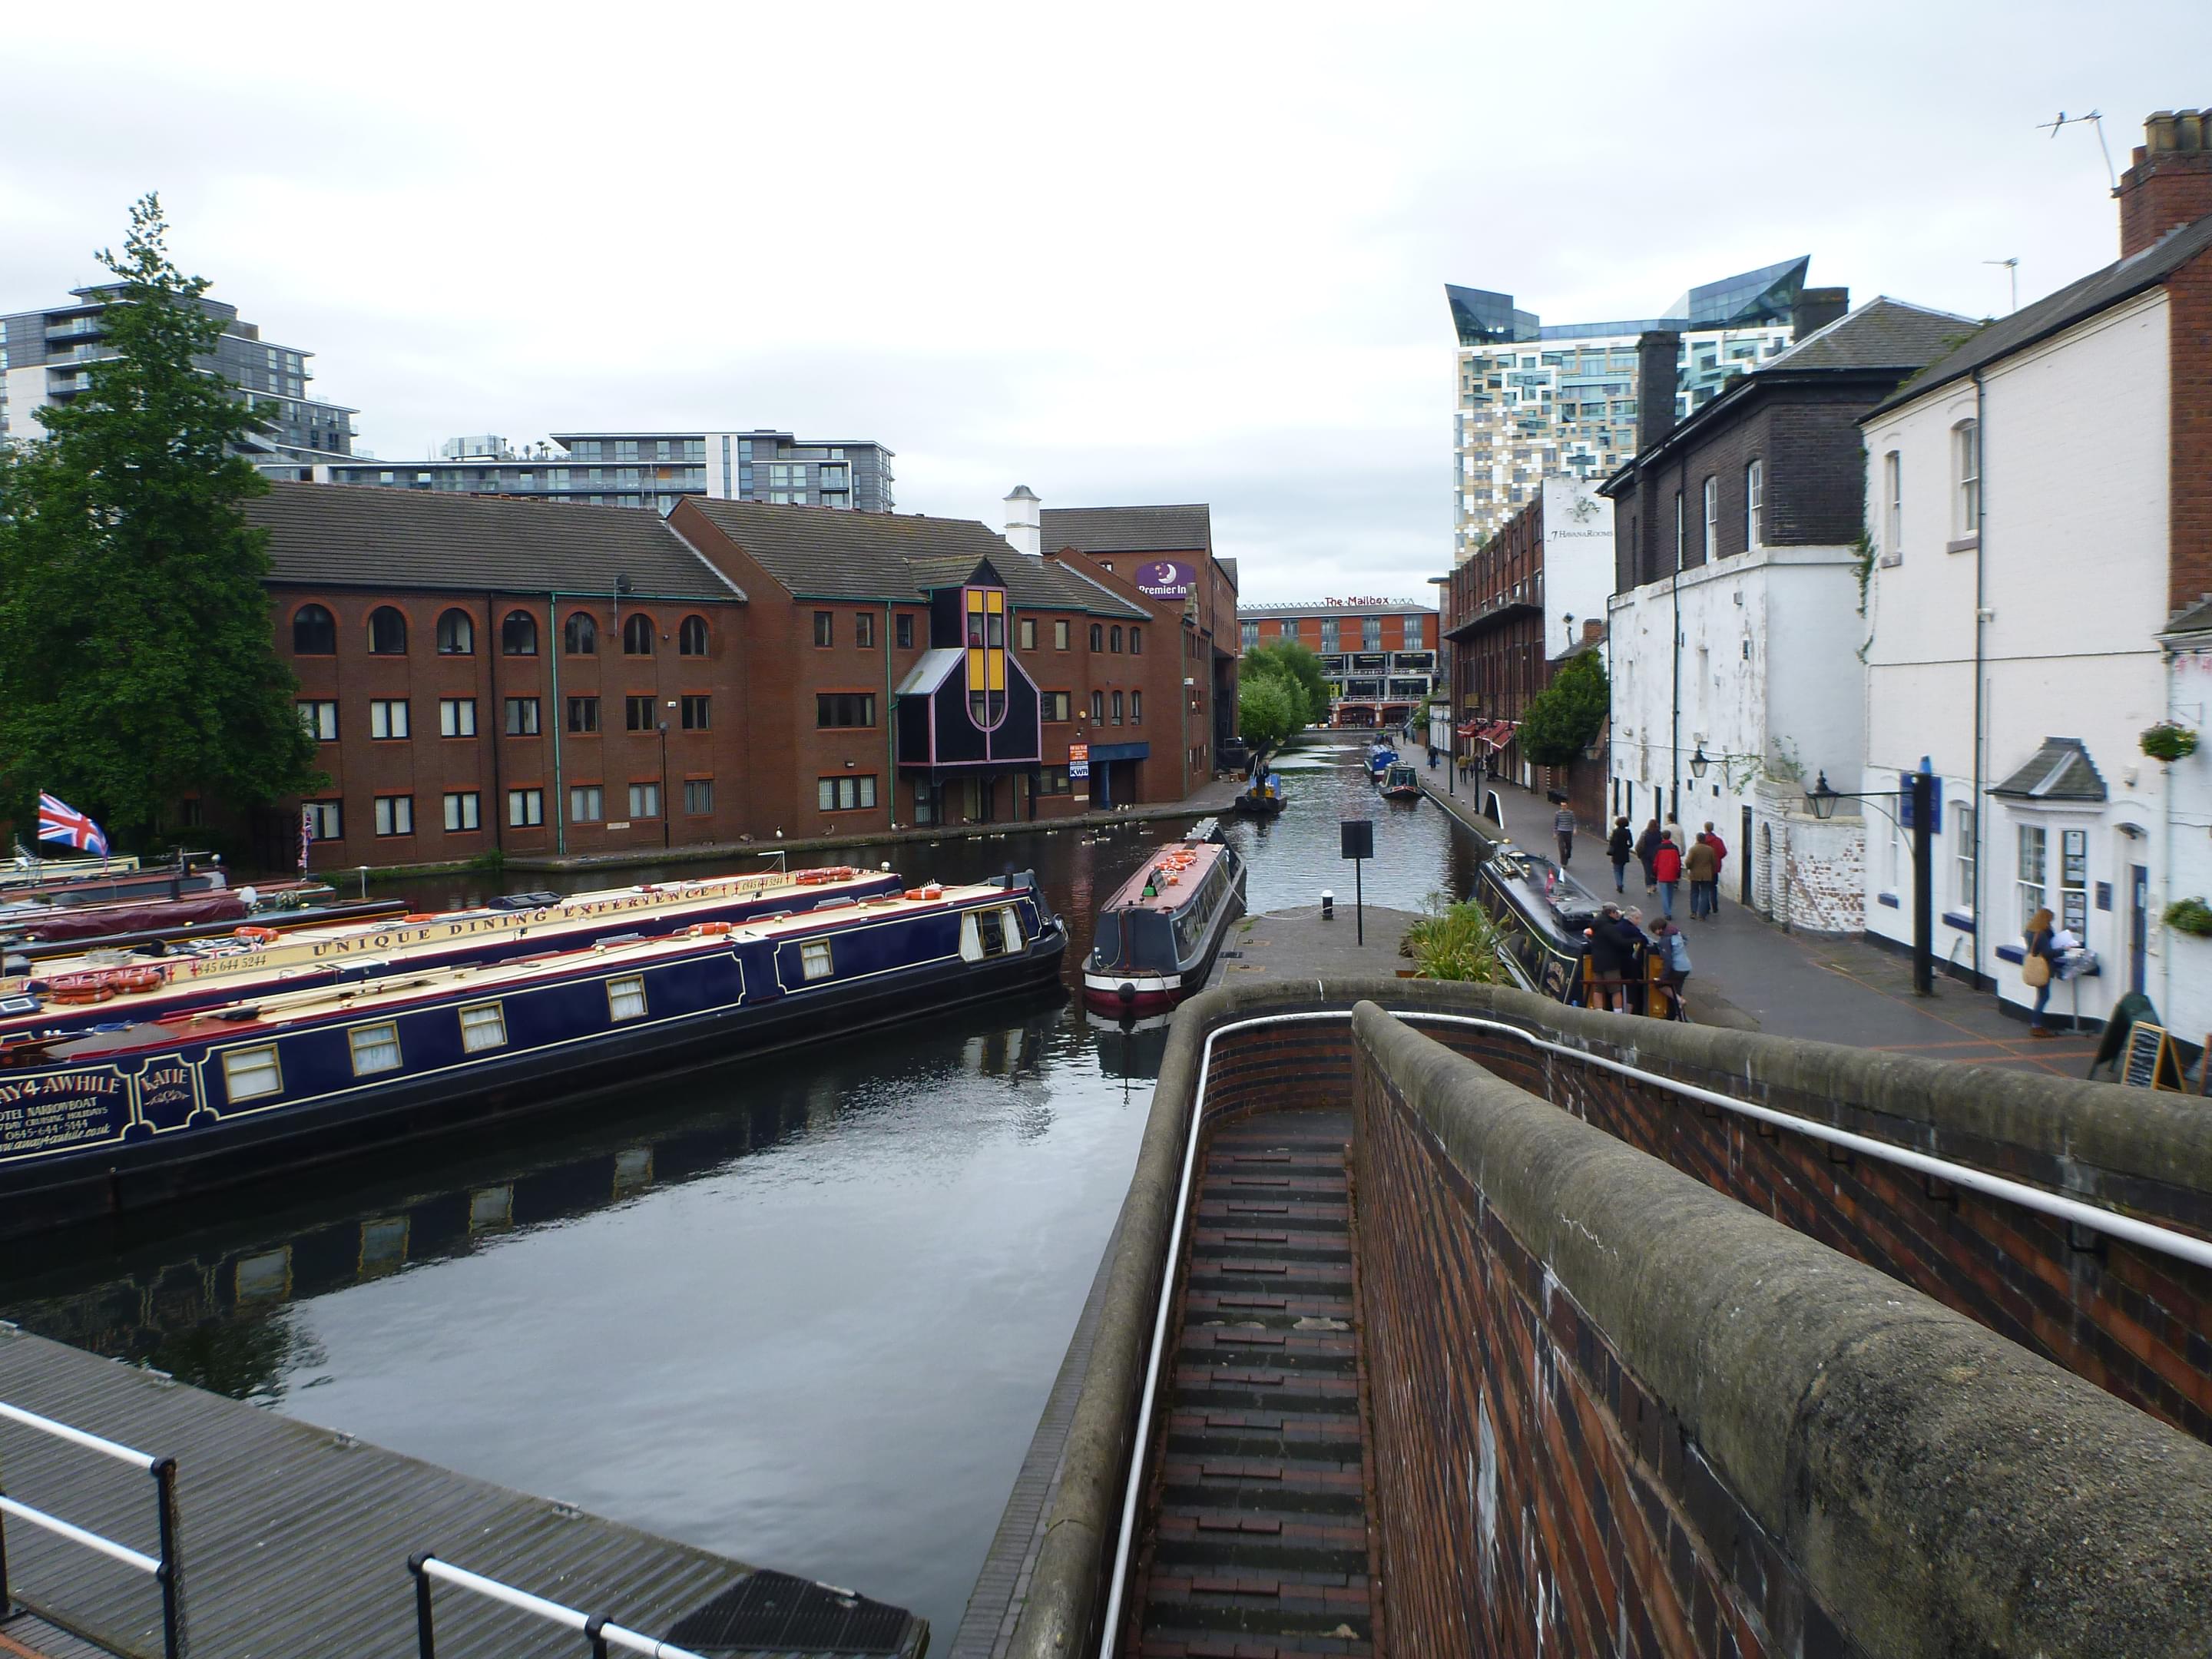 Gas Street Basin Overview